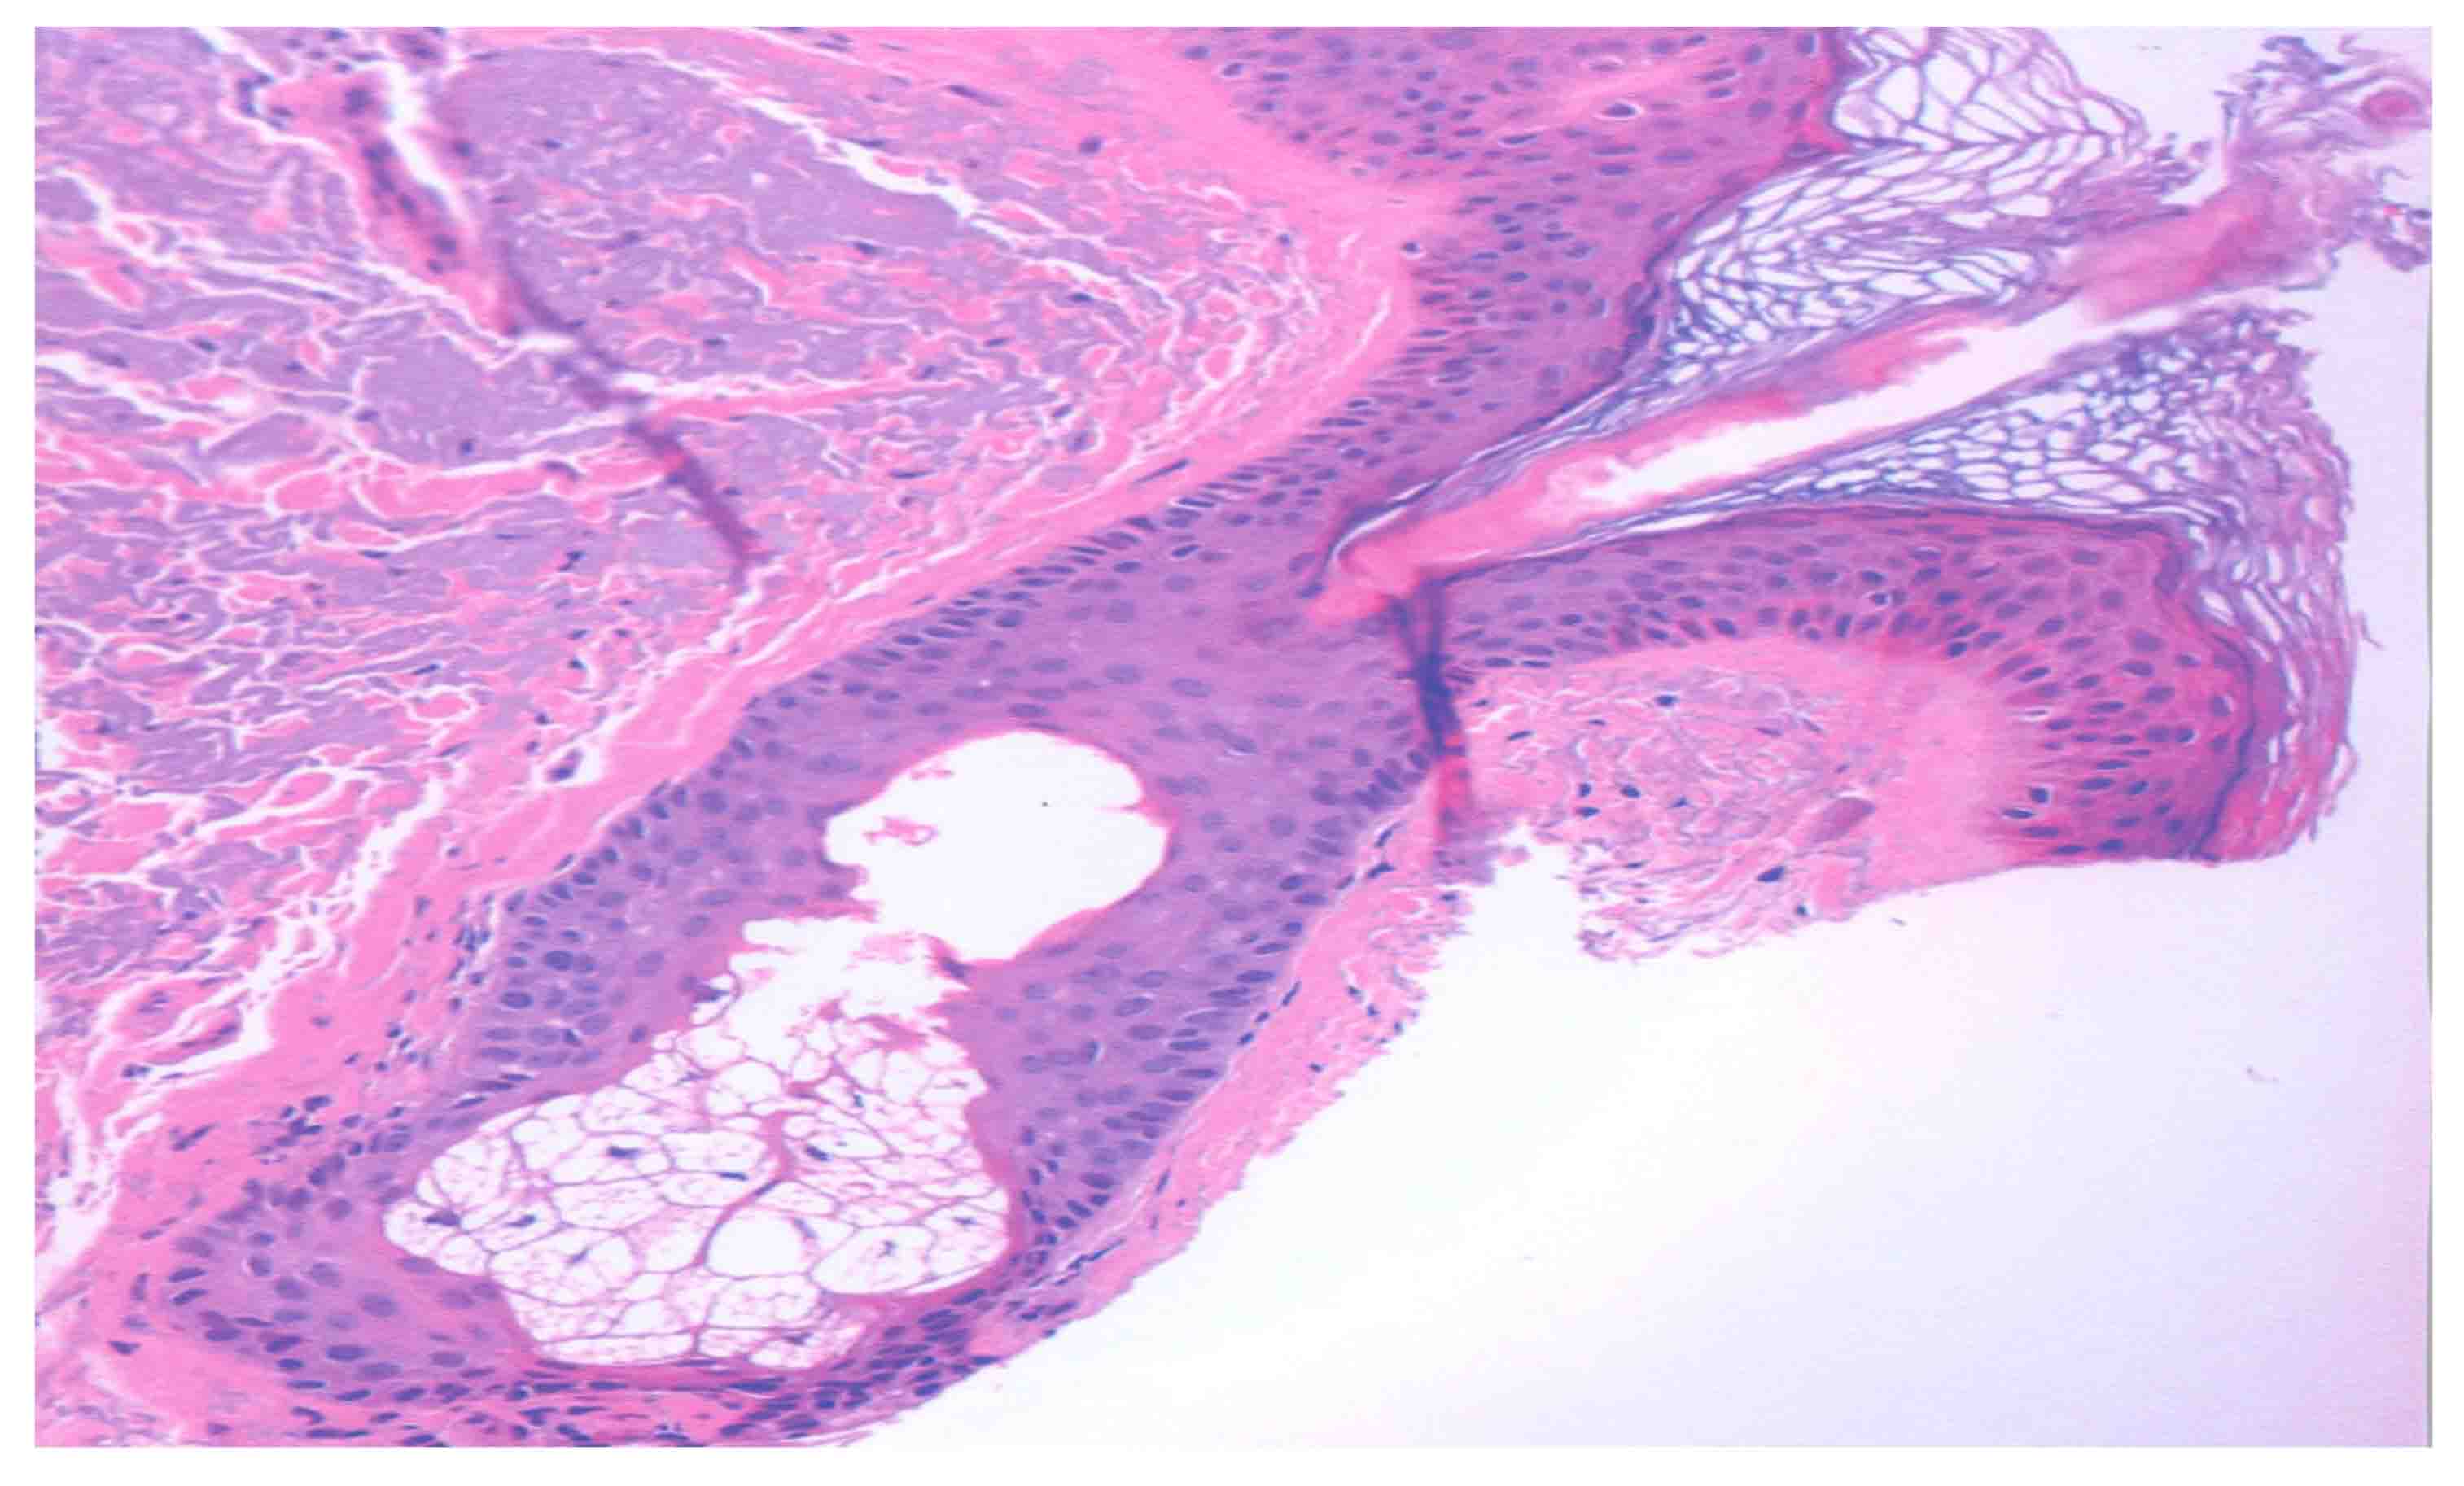 histological section of a sebaceous gland